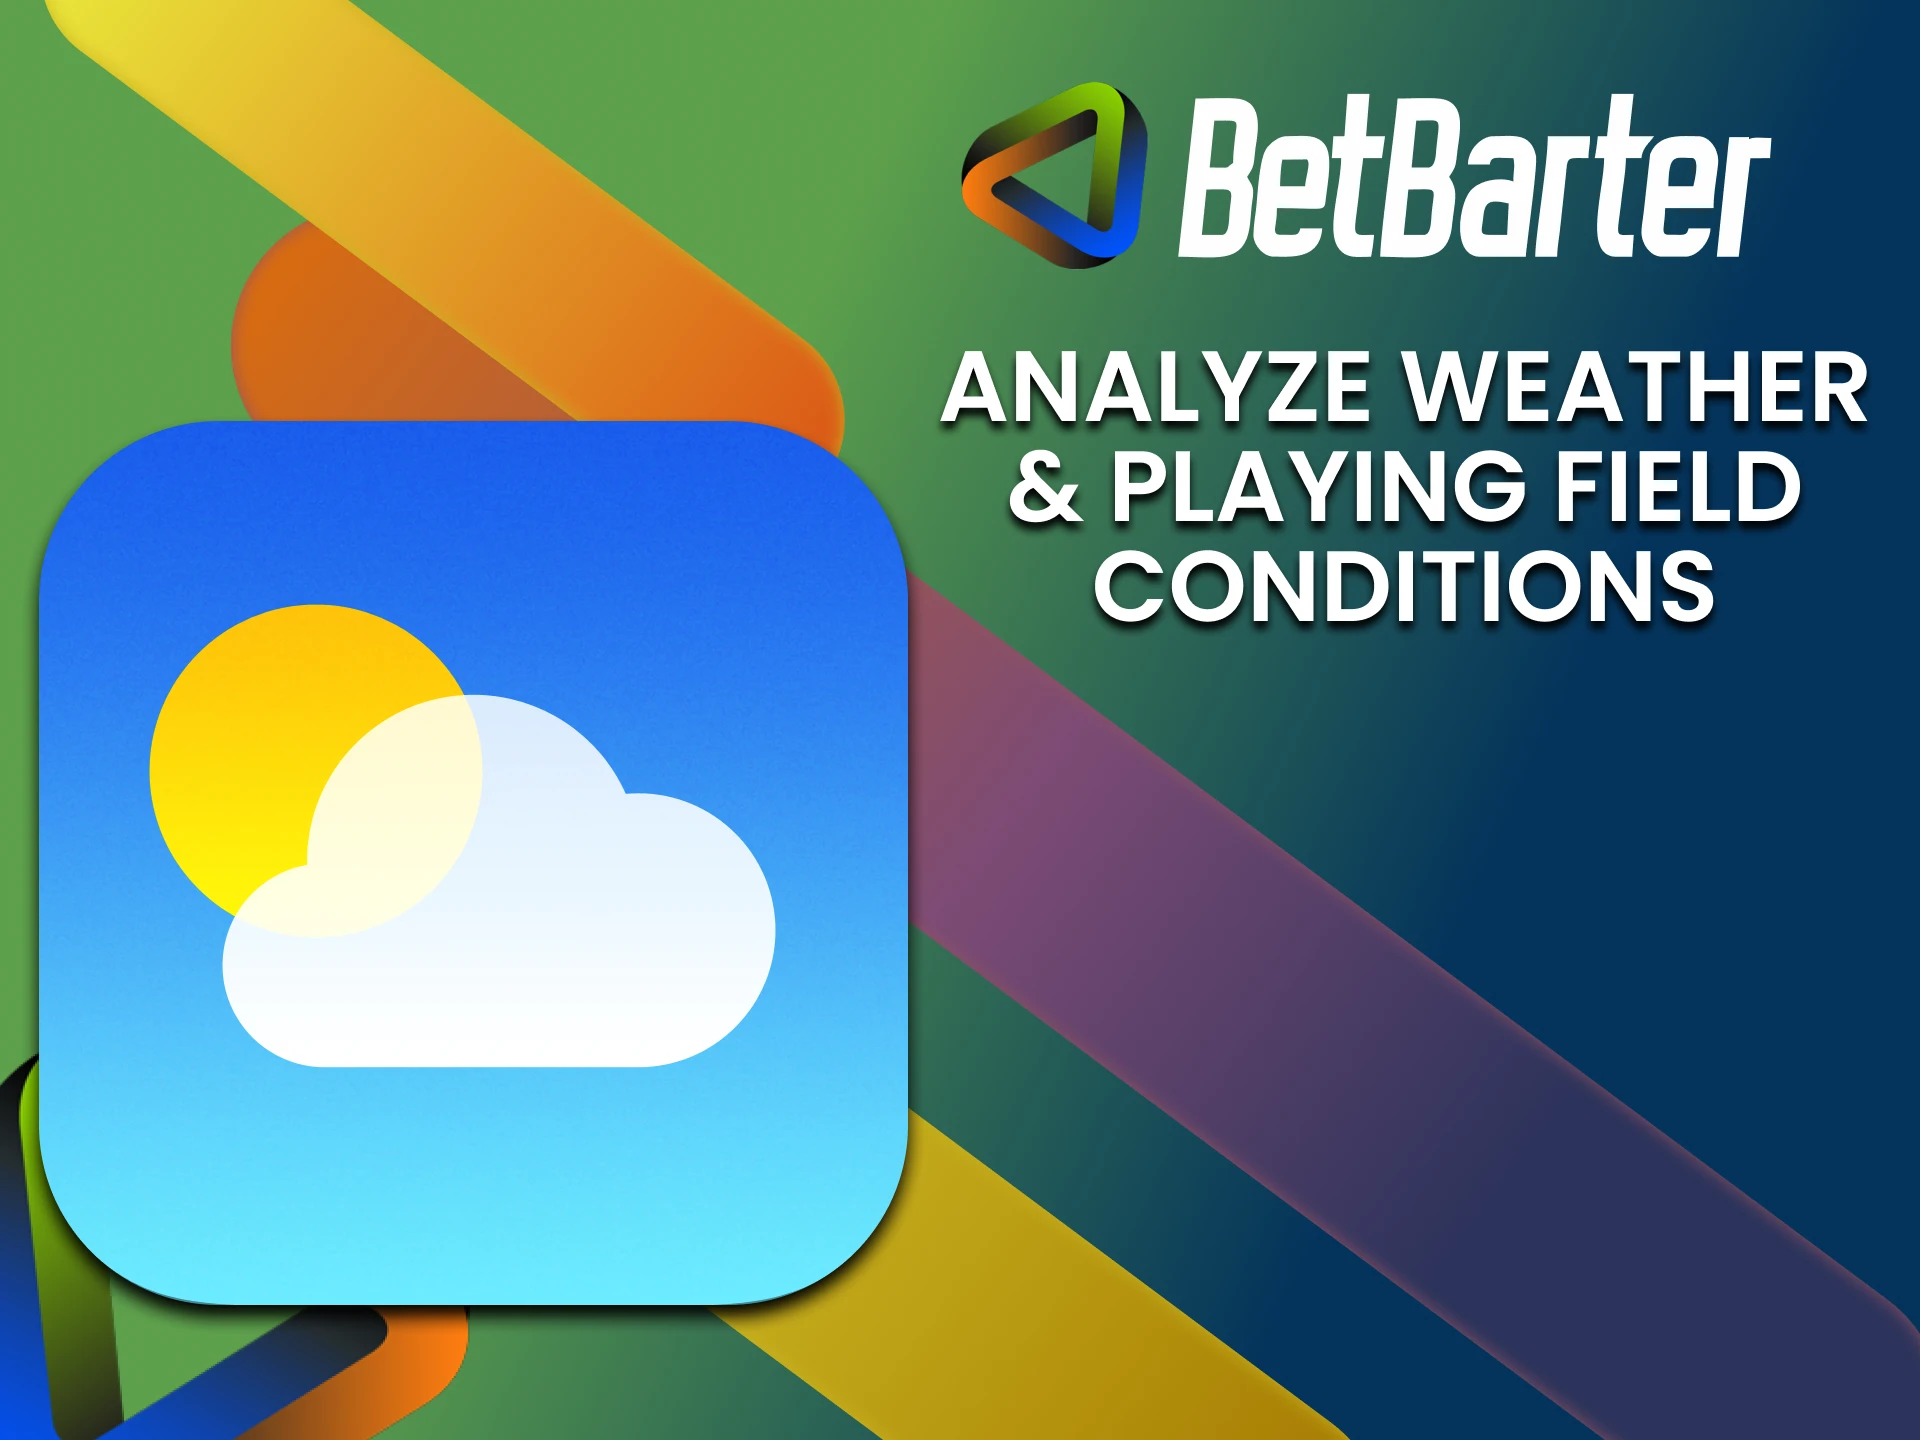 Check weather conditions for IPL matches on BetBarter.